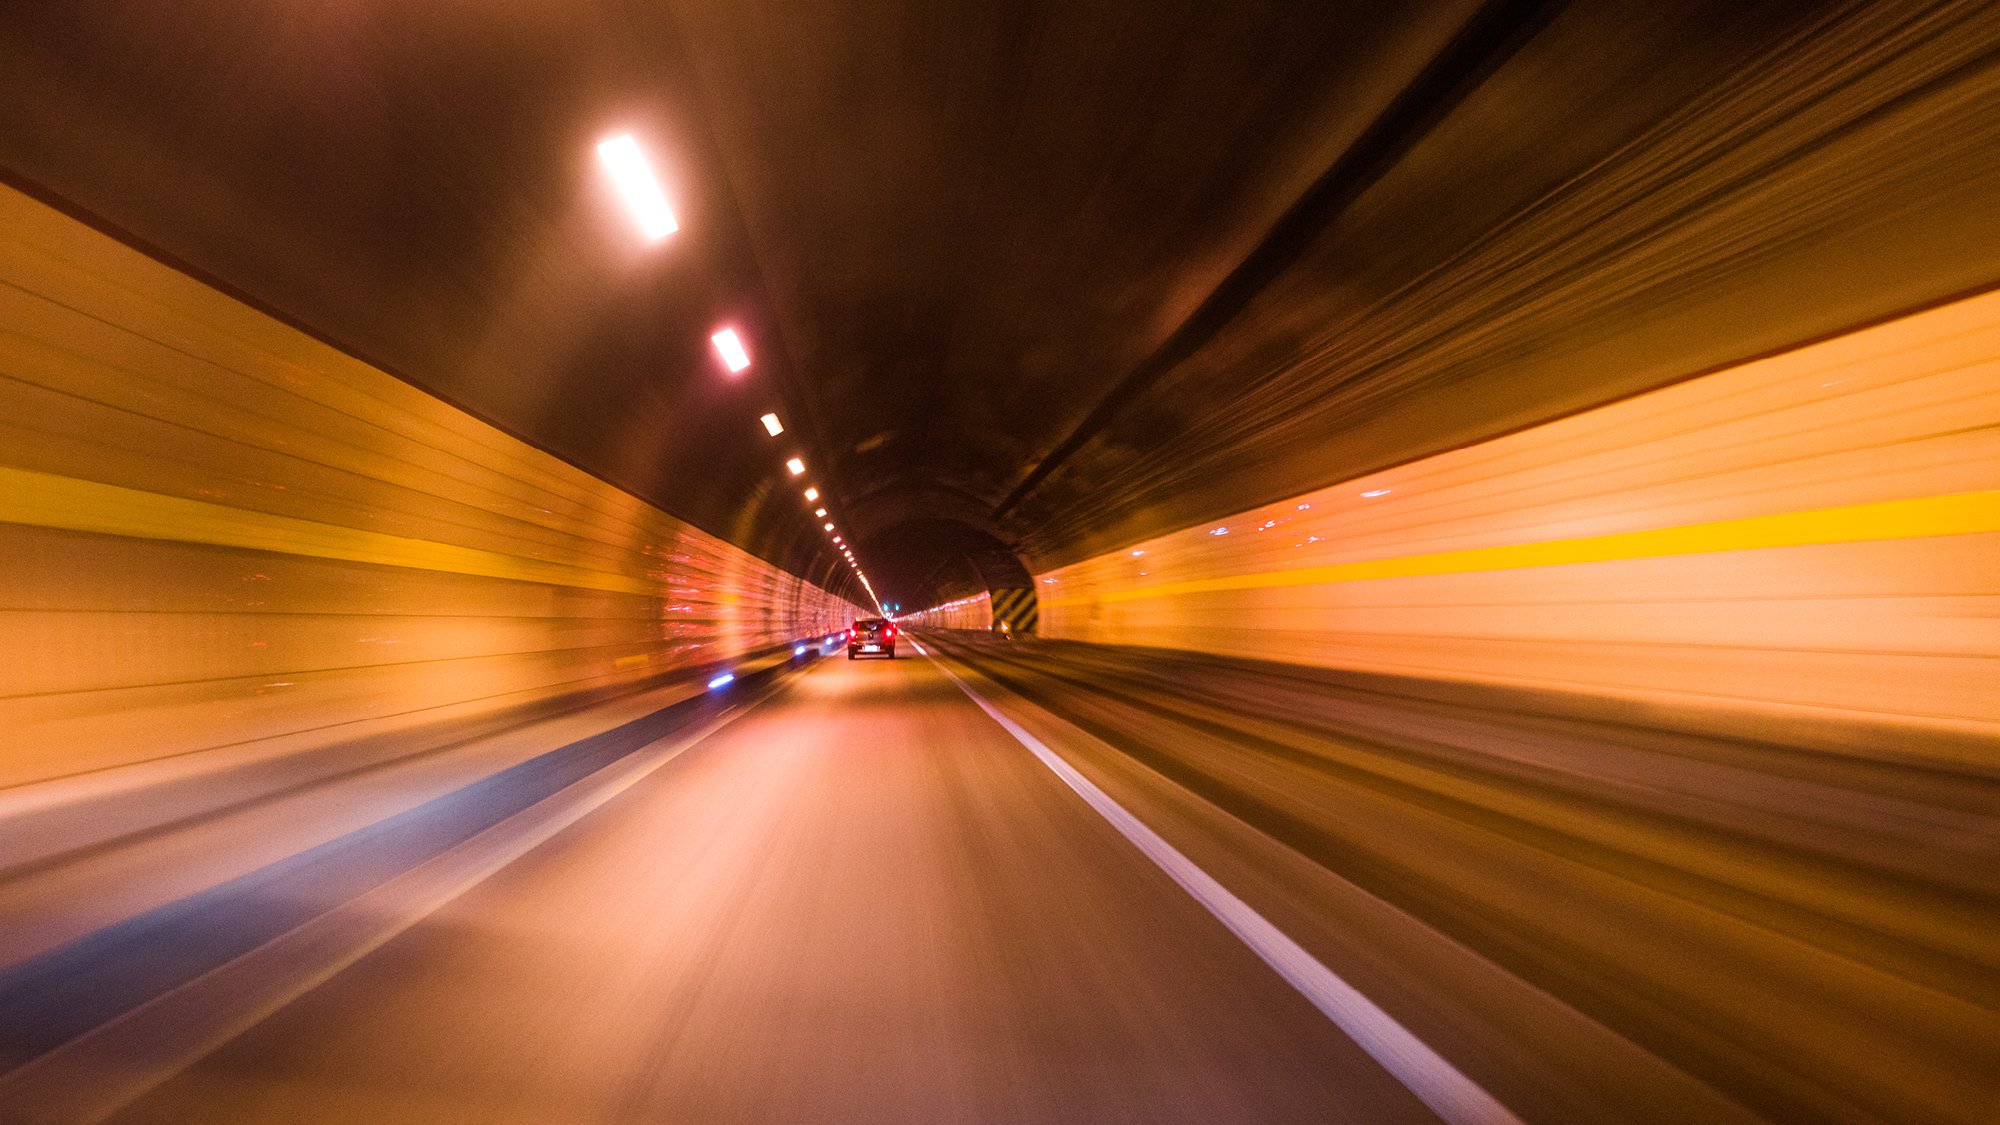 A photograph in side a tunnel speeding along behind a car